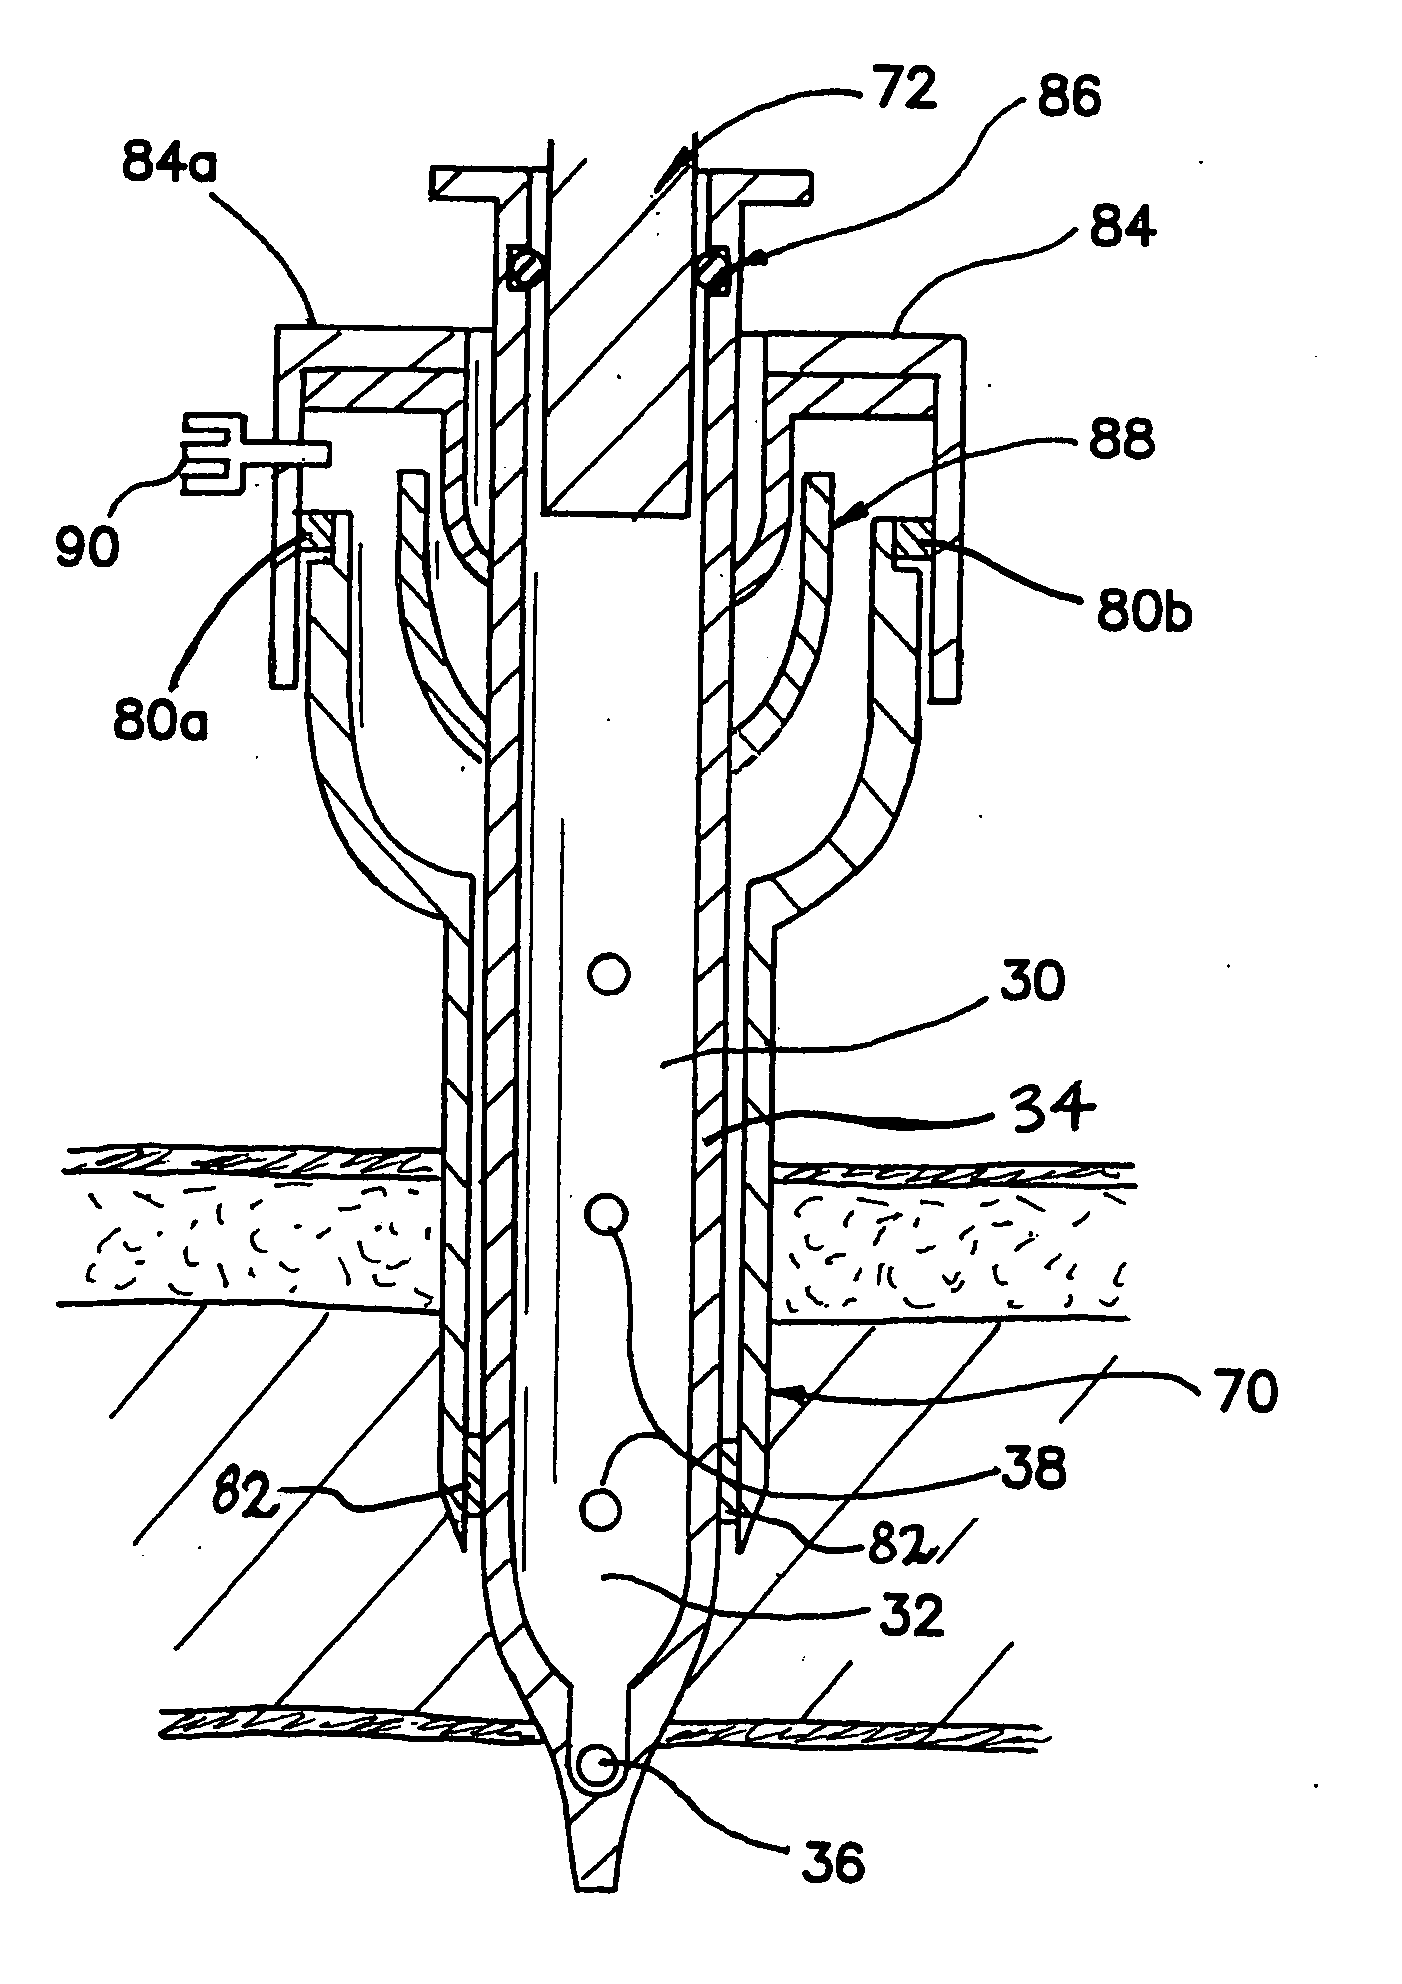 Insufflating optical surgical instrument